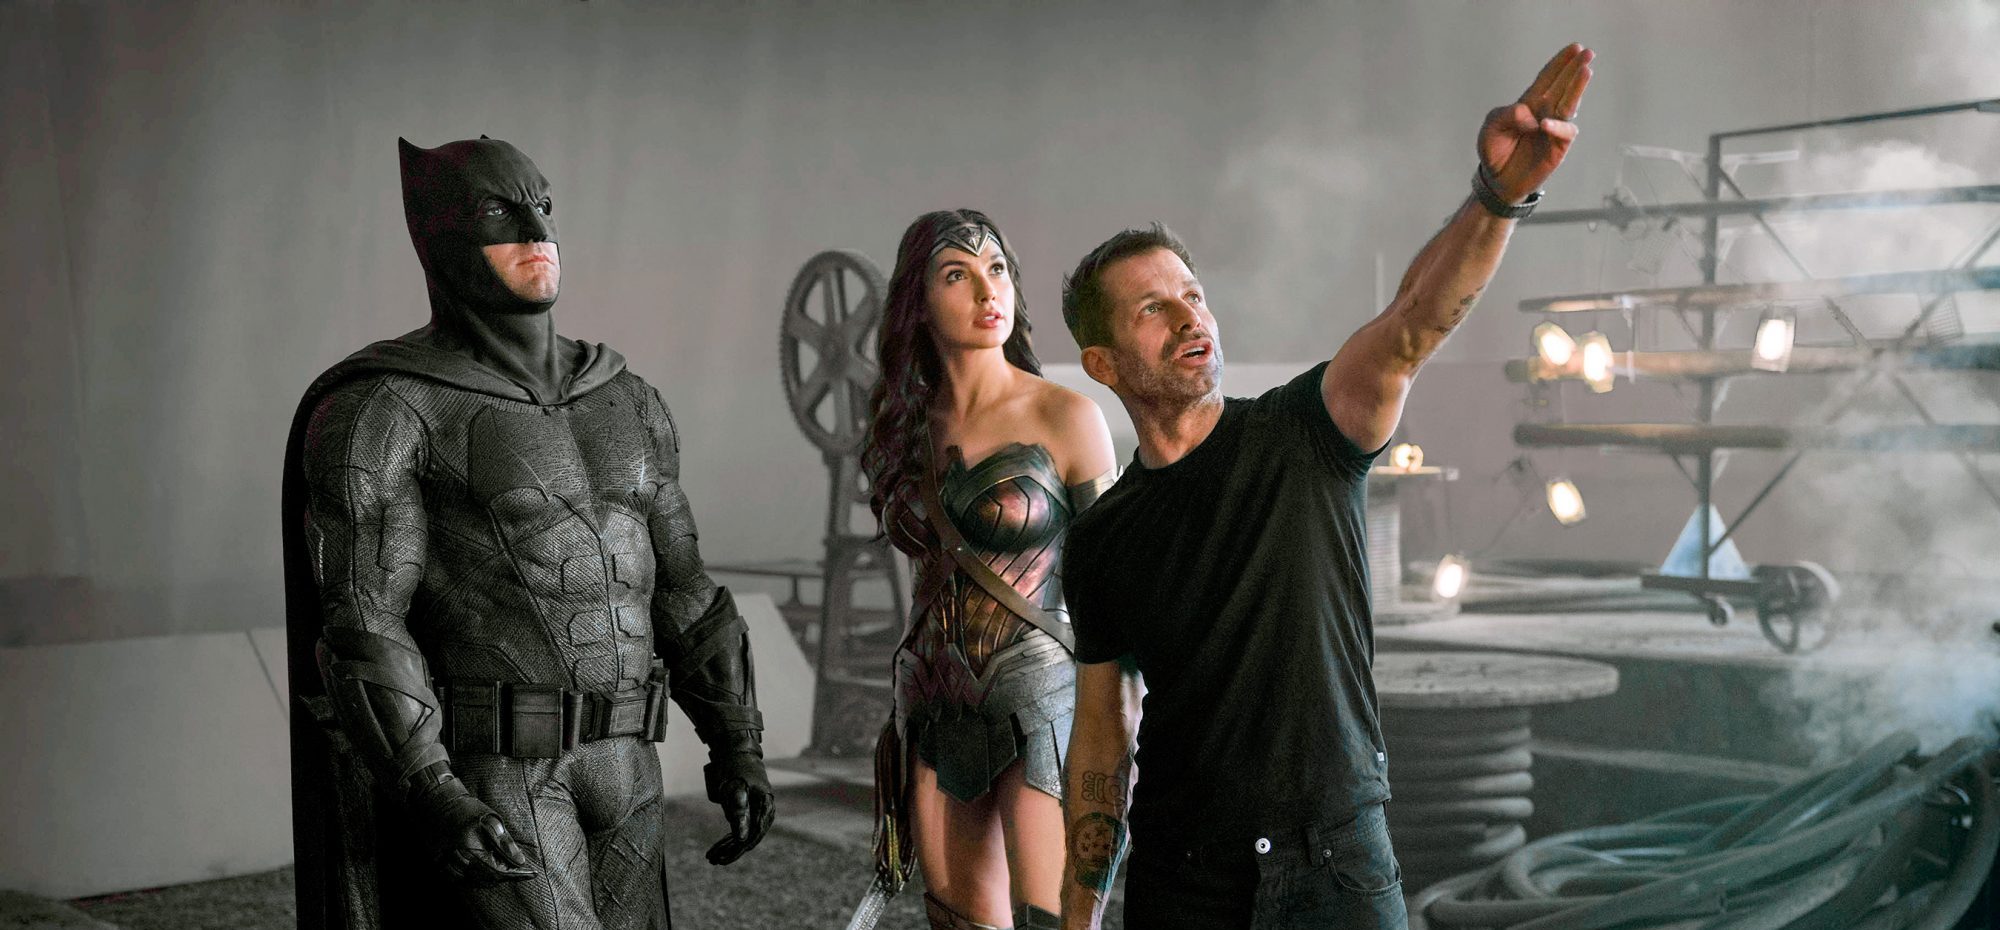 Review of the movie Zack Snyder's Justice League blockbuster DC house